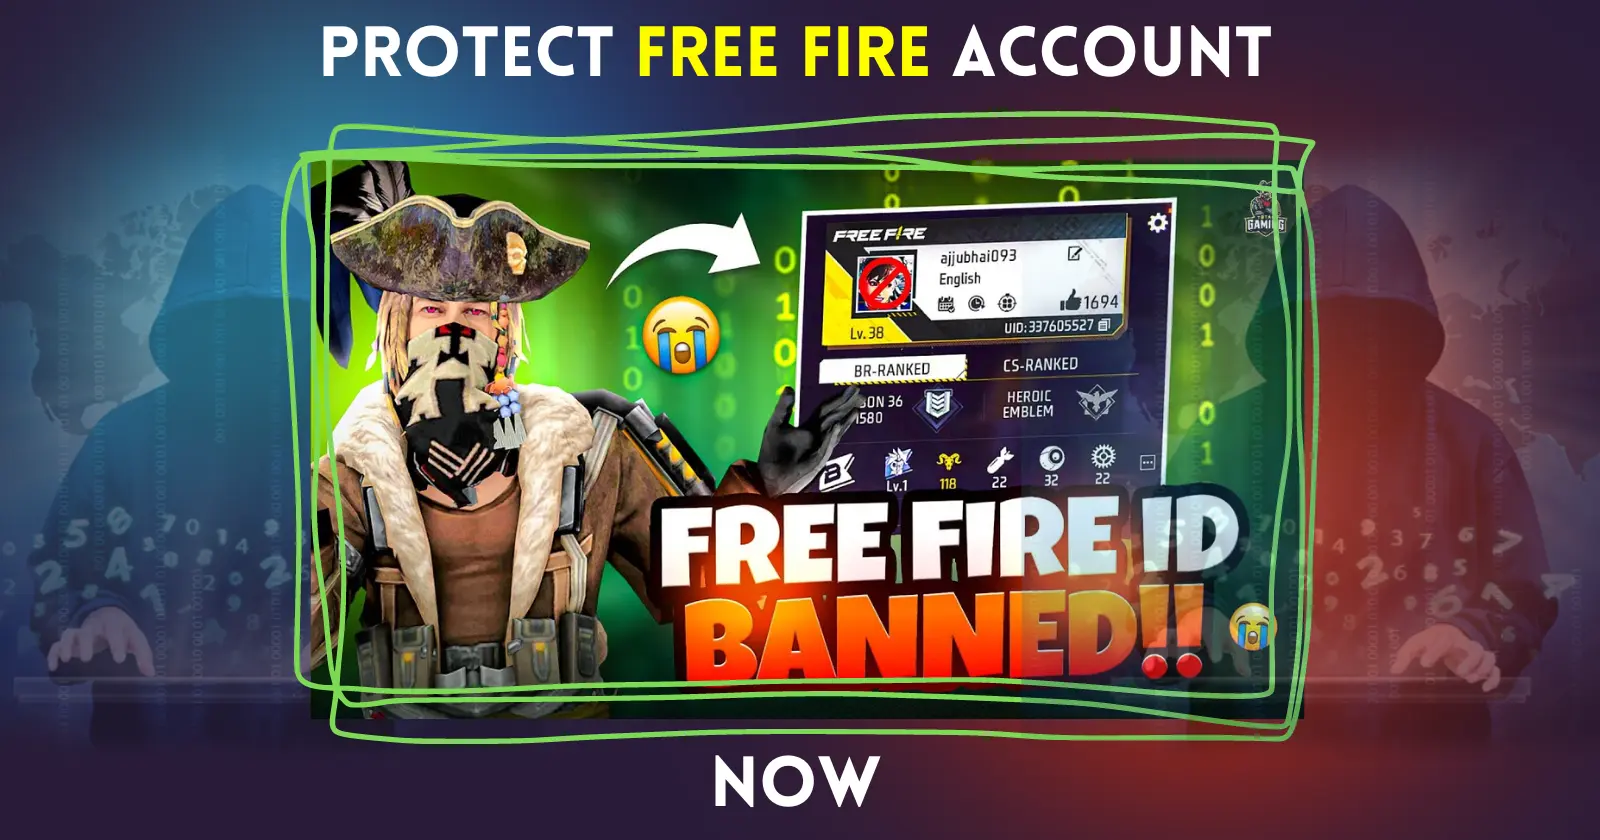 A cautionary graphic: Protect your Free Fire account to avoid bans.